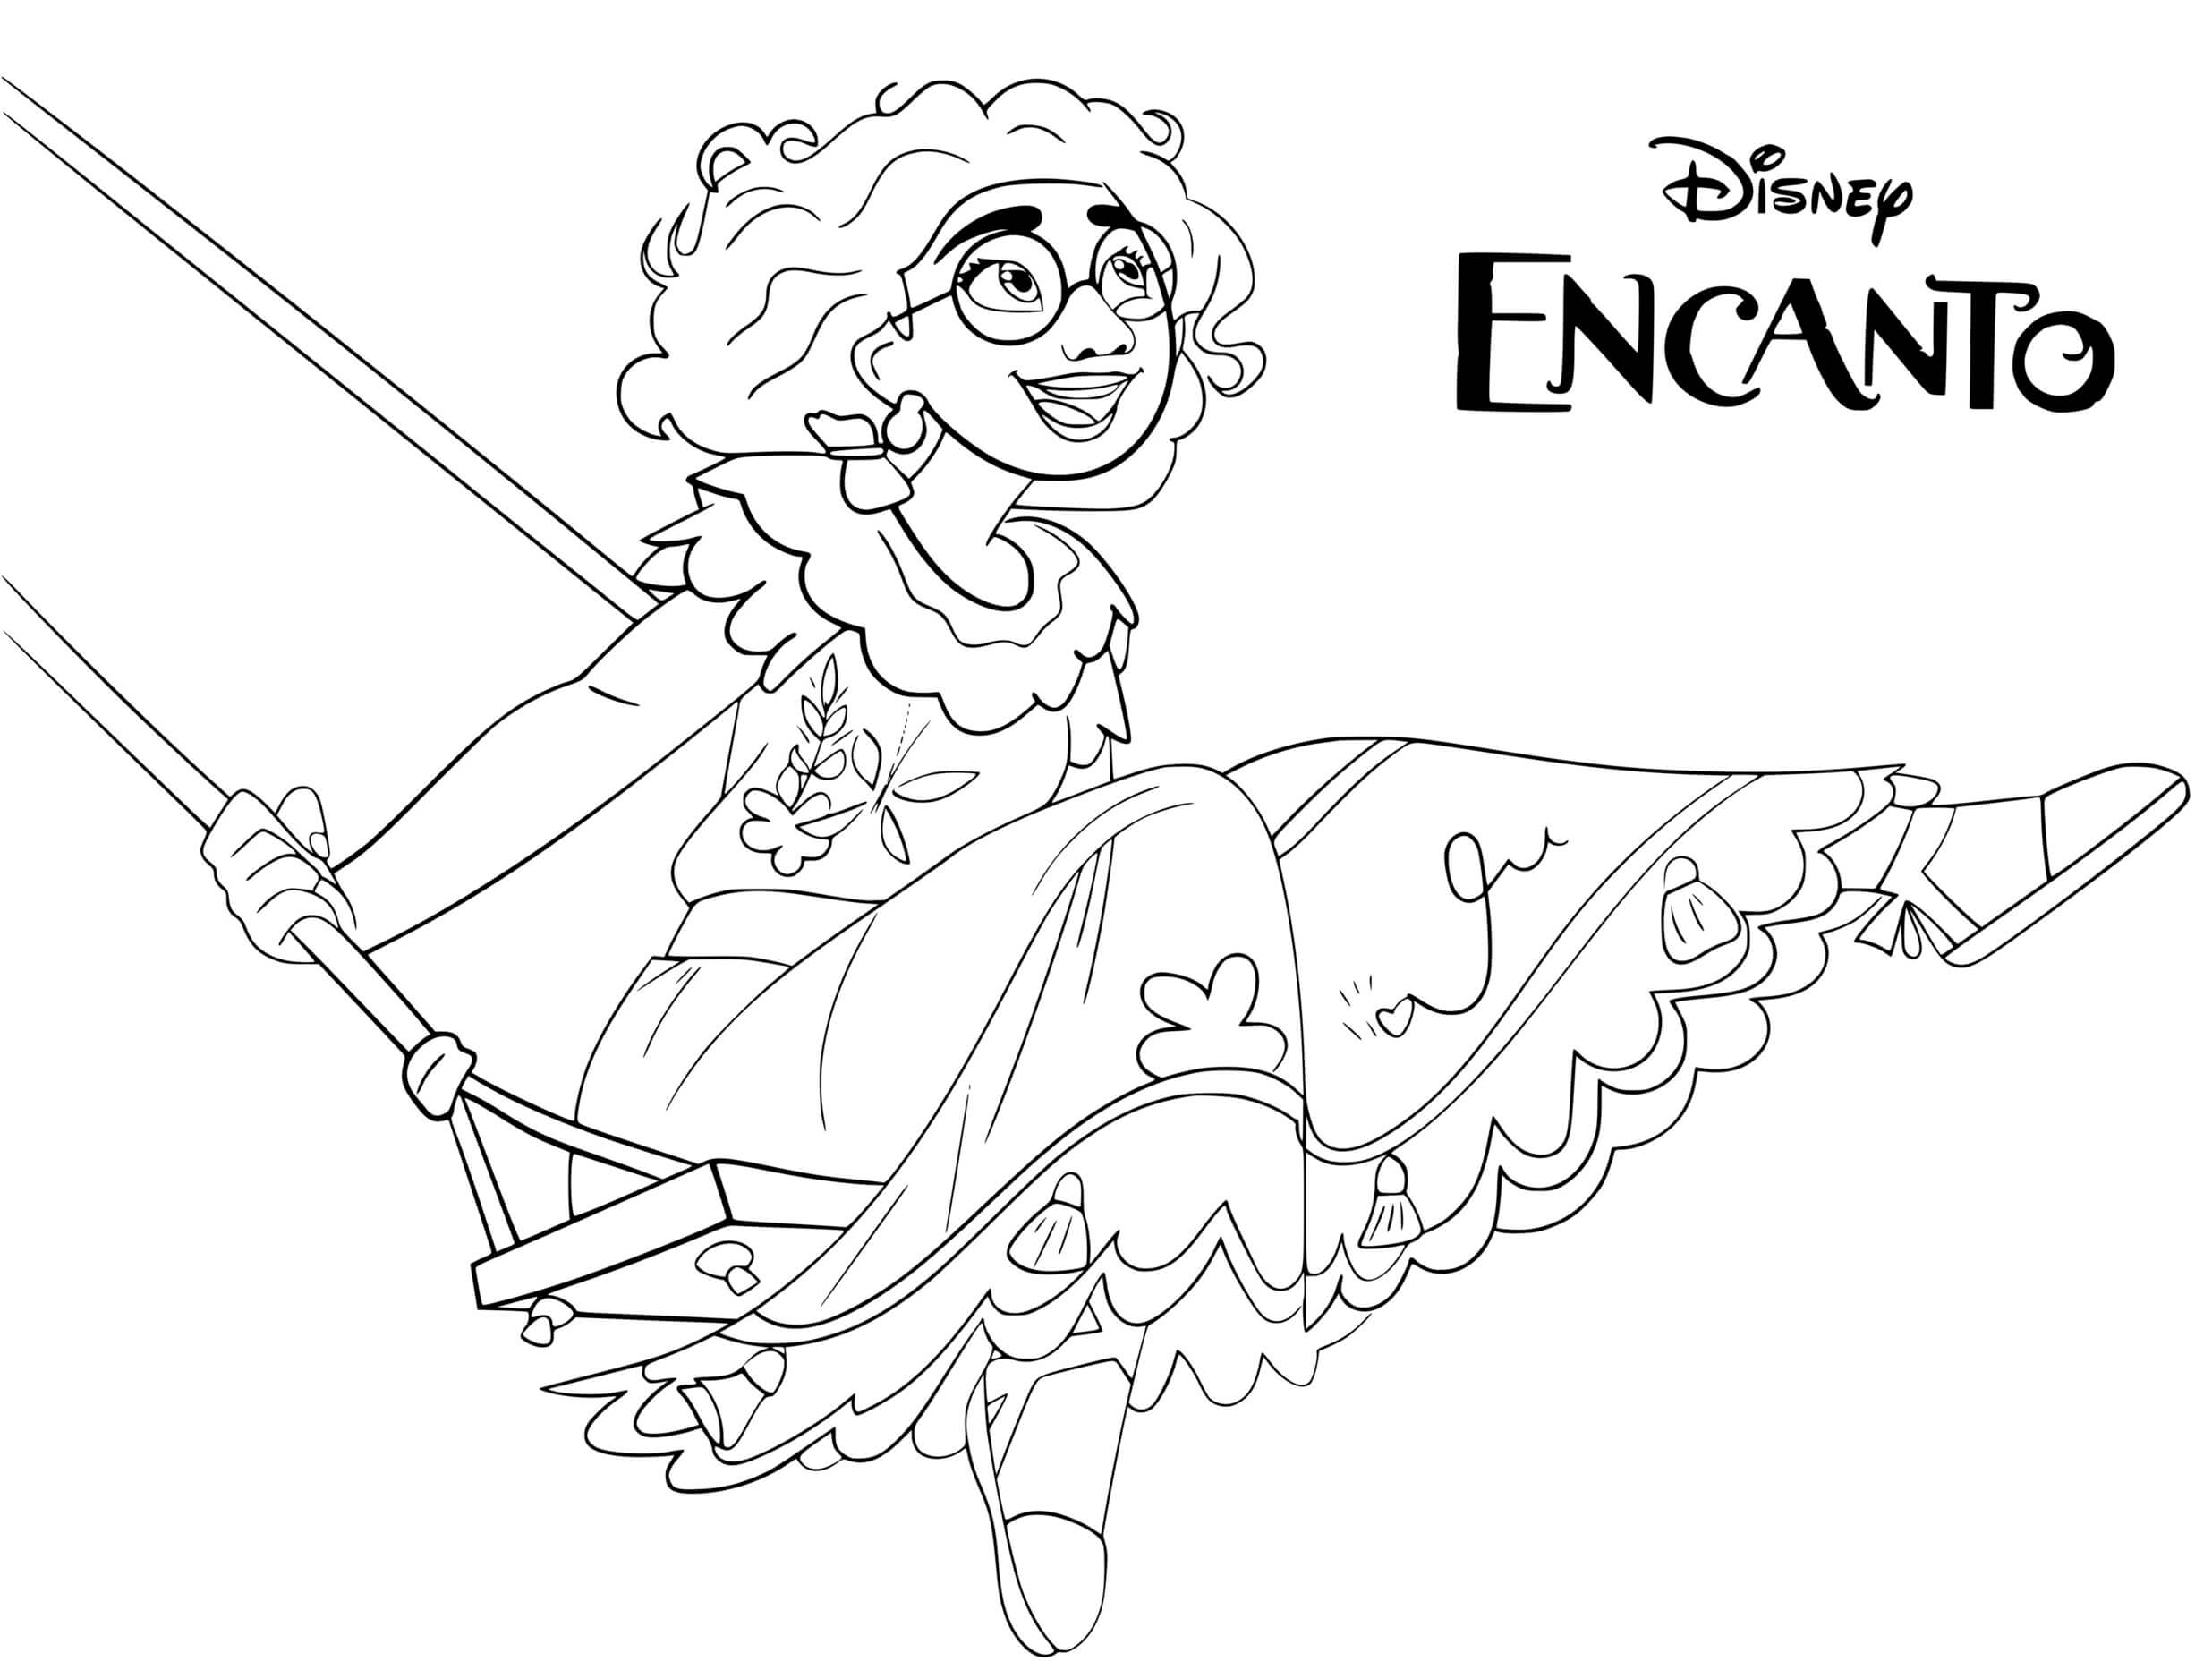 Mirabel Madrigal Of Encanto Coloring Pages